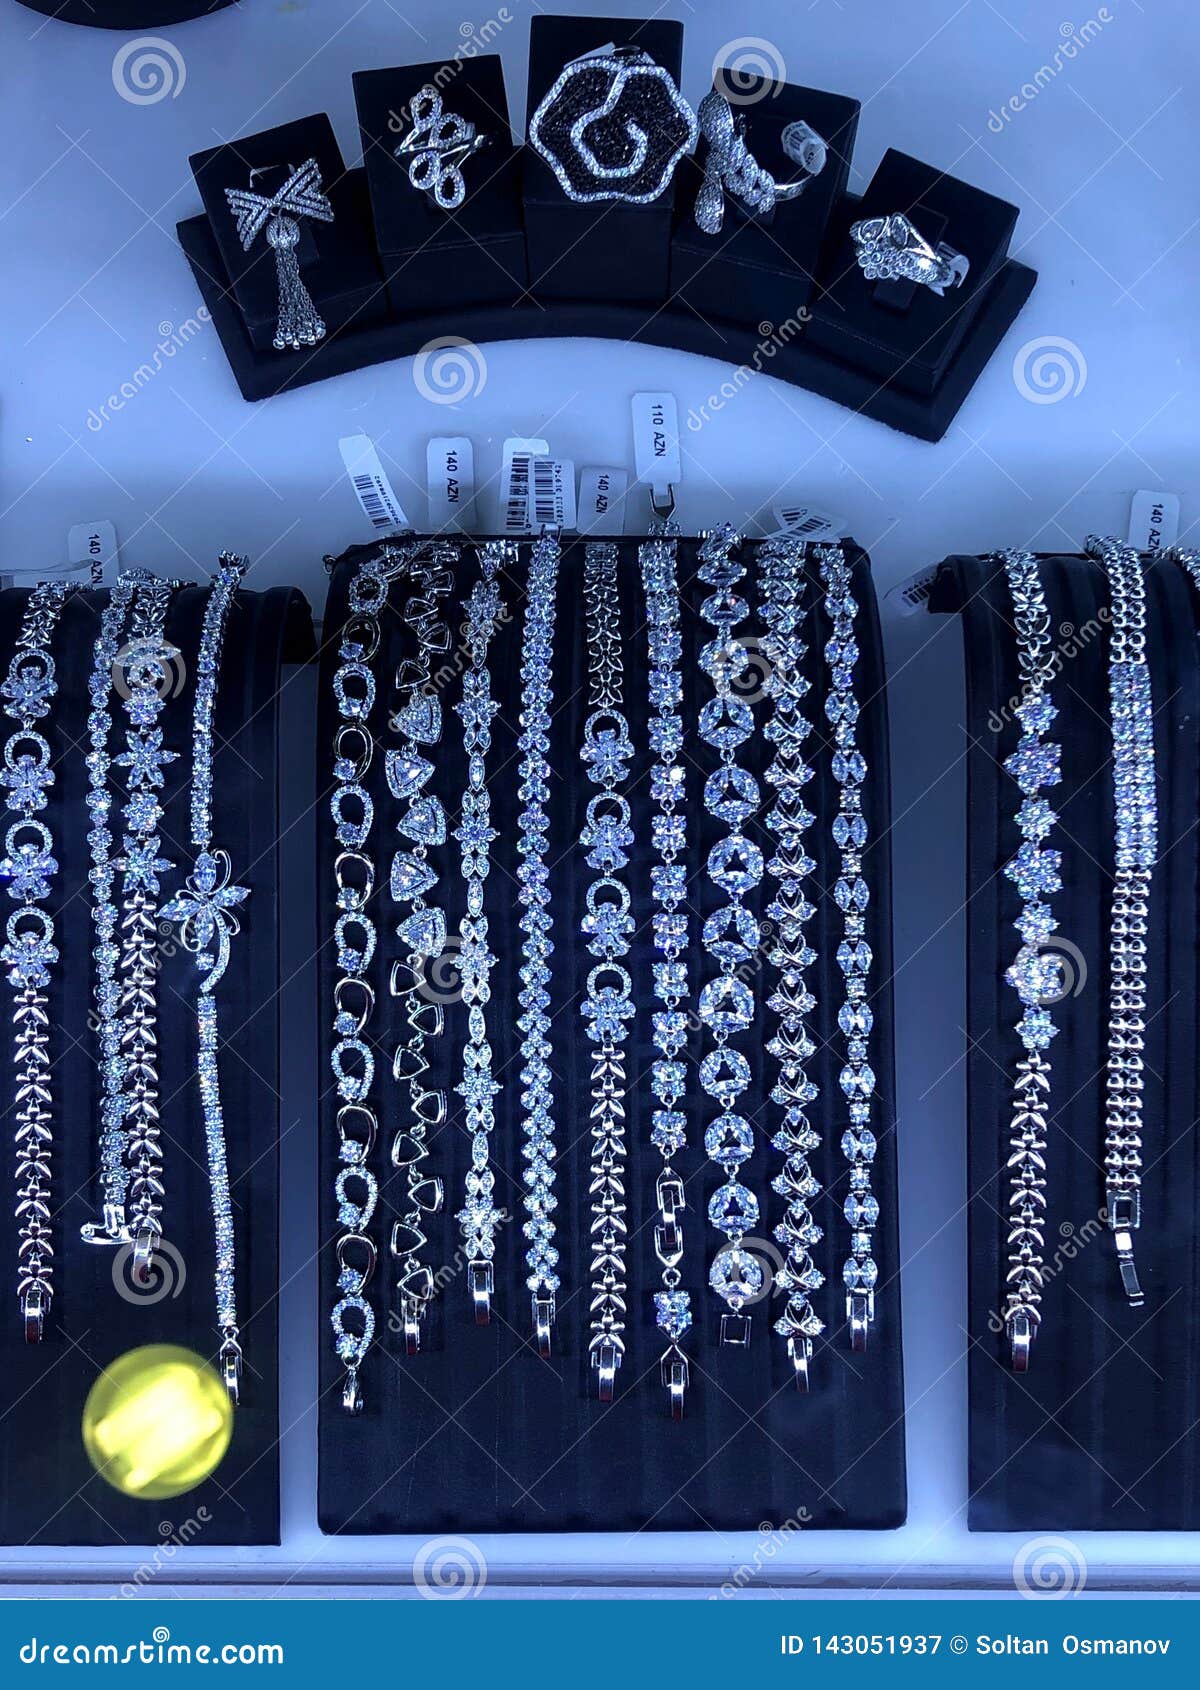 Jewelry and accessories. stock image. Image of formal - 143051937